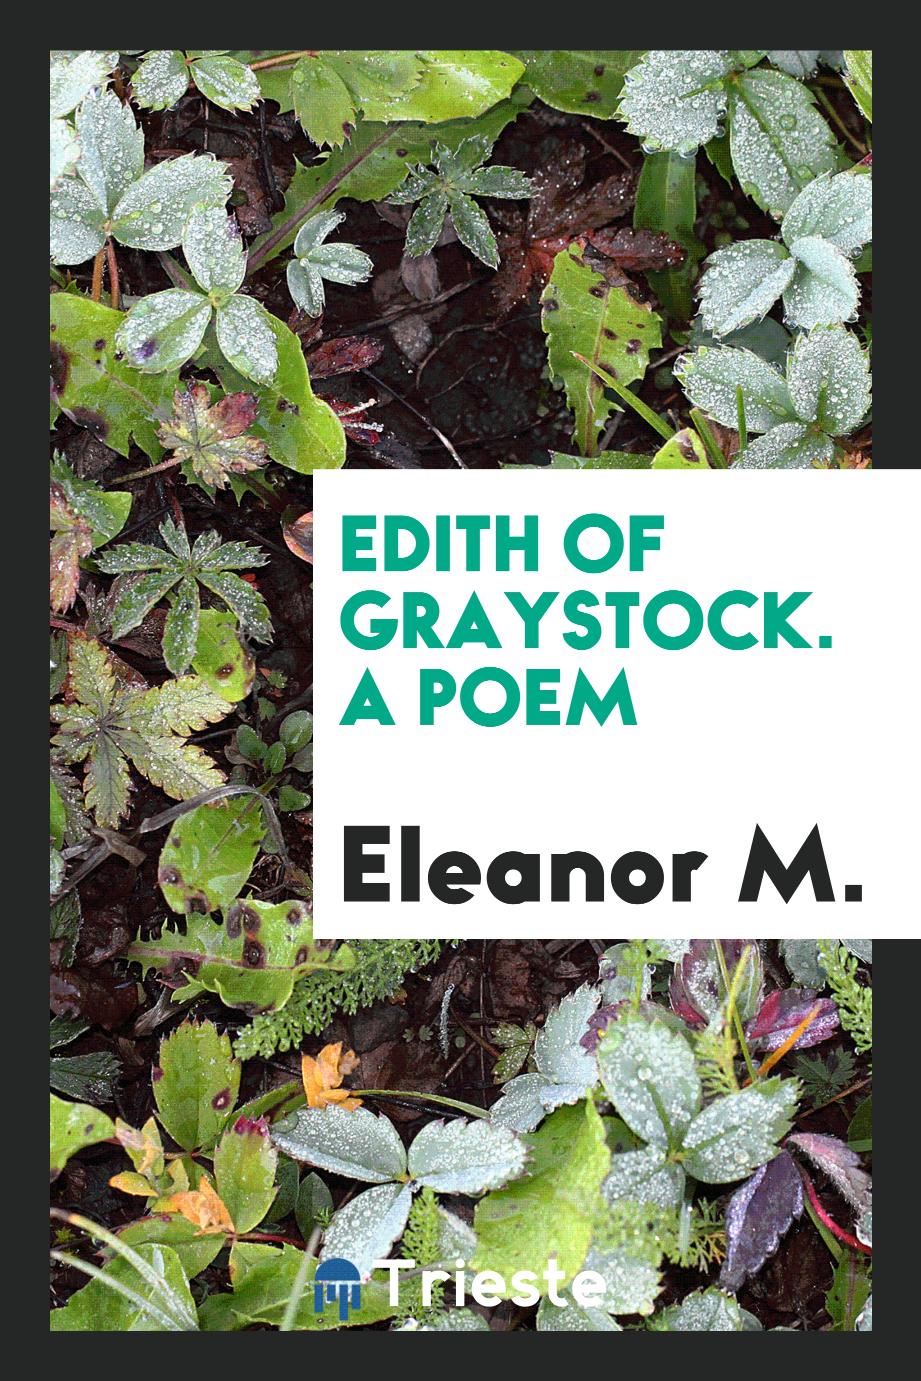 Edith of Graystock. A Poem